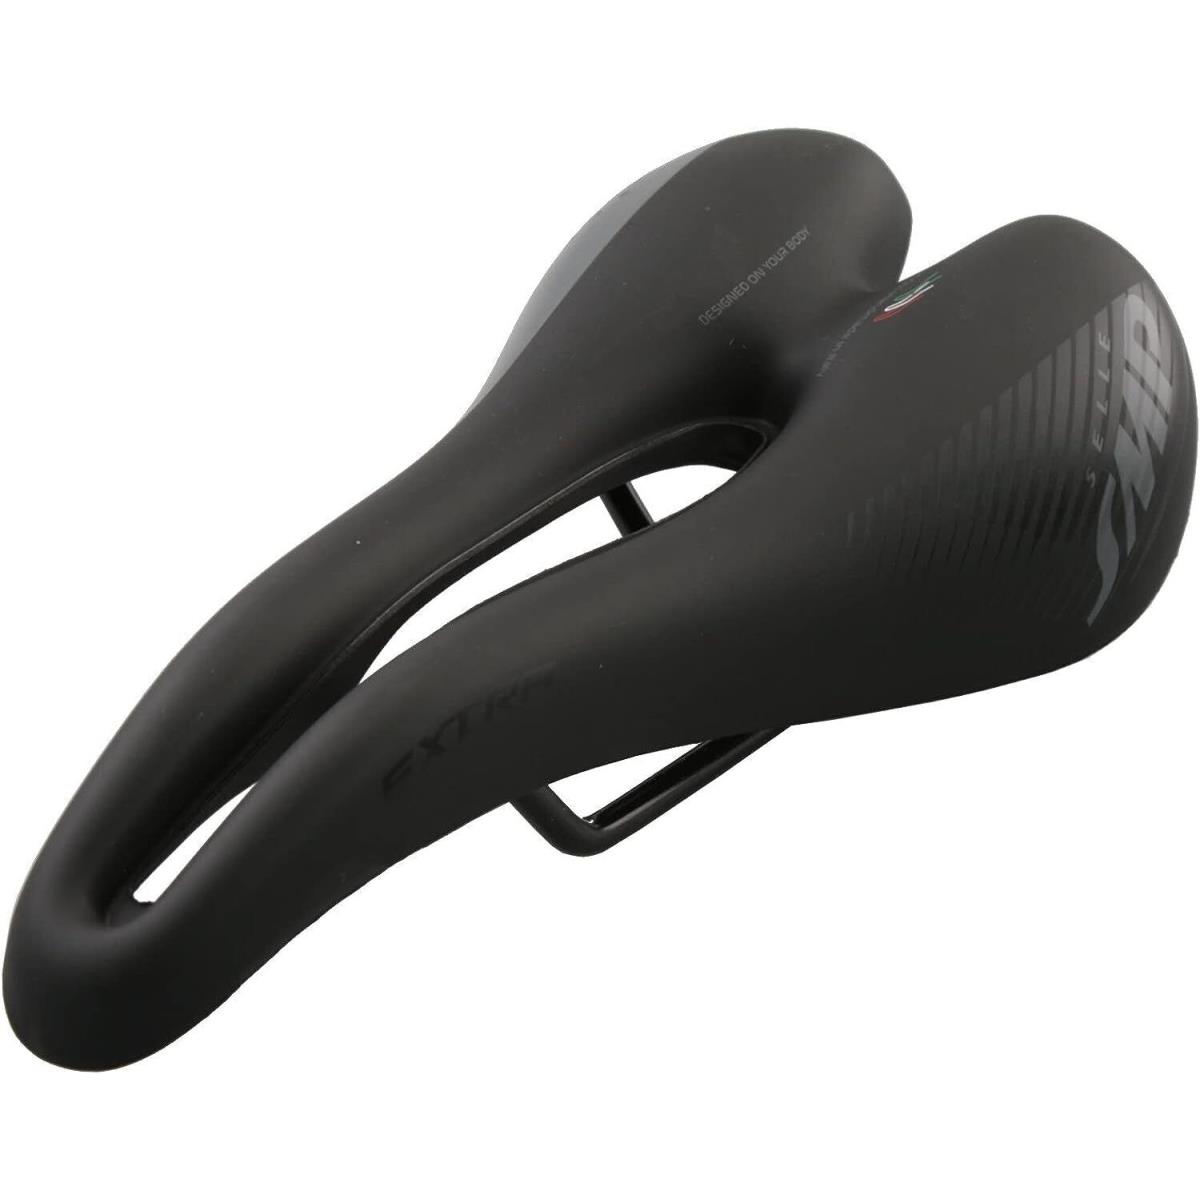 Selle Smp Extra Saddle Black Synthetic Large Central Cutout Cushioned Padding US